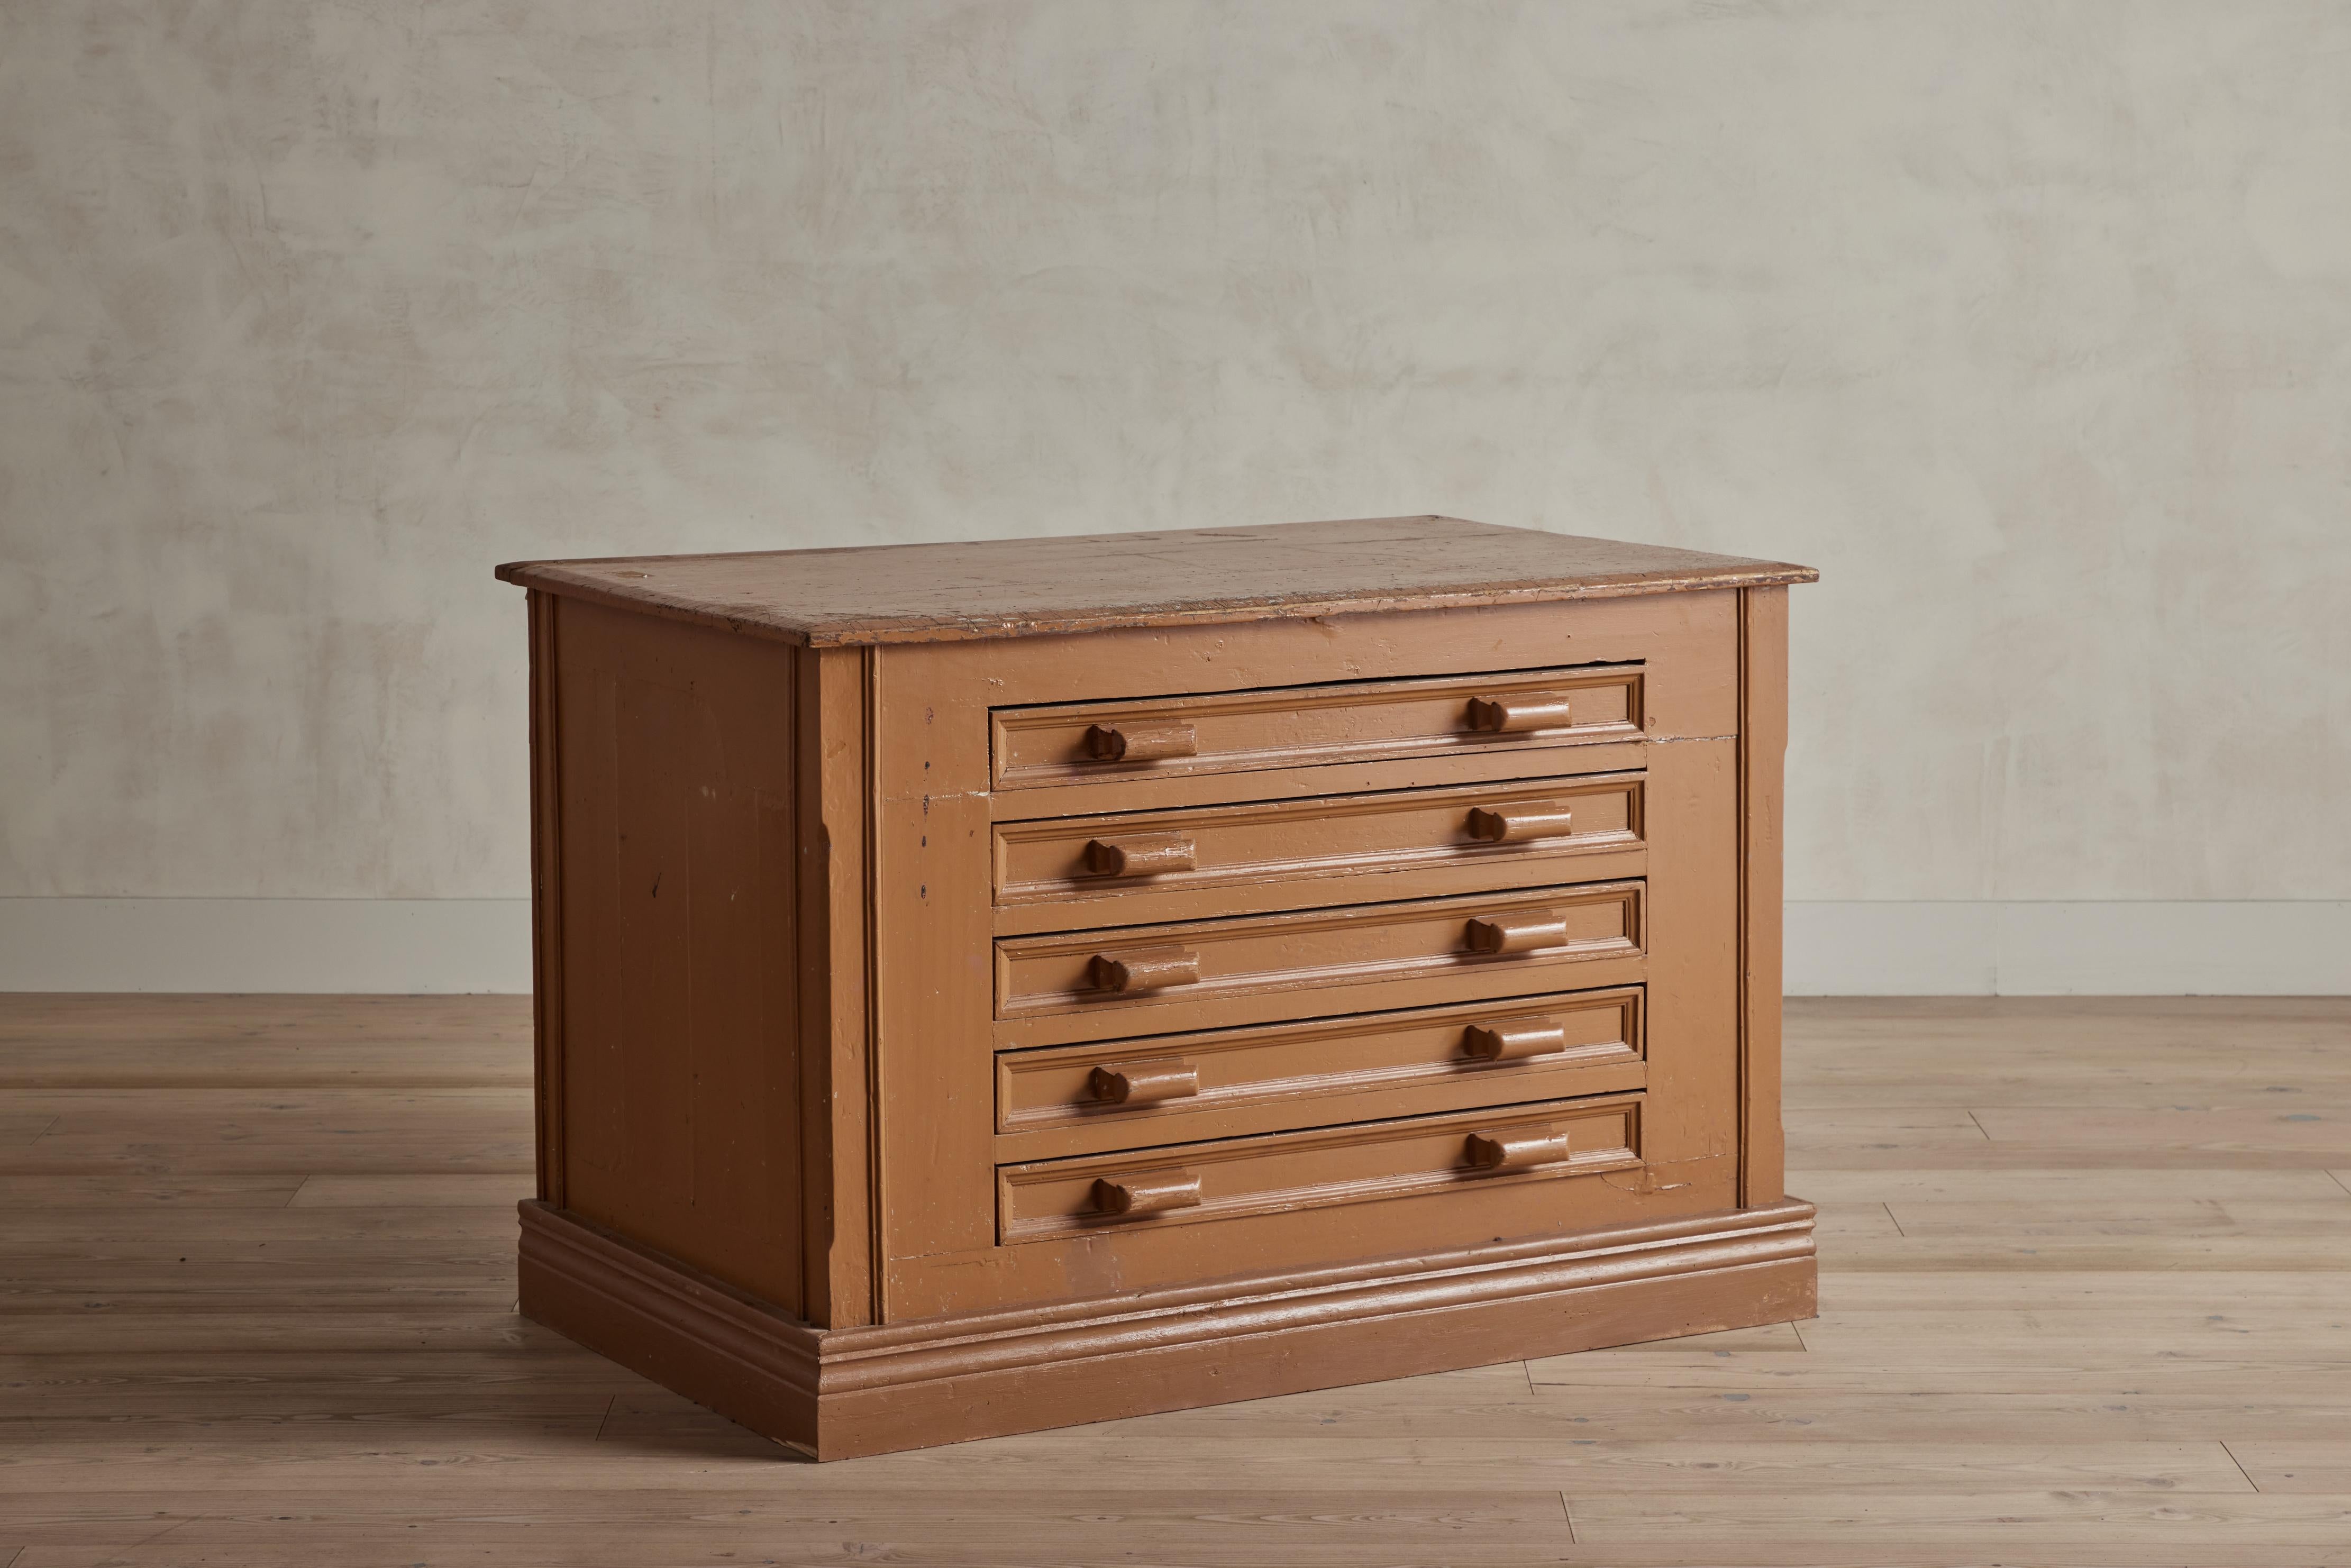 Brown hand painted architect’s drawers from France circa 1900. Chest features five drawers originally used for architect document storage. Wear on wood and paint that is consistent with age and use. Perfect for storage, entry or bedside table. 